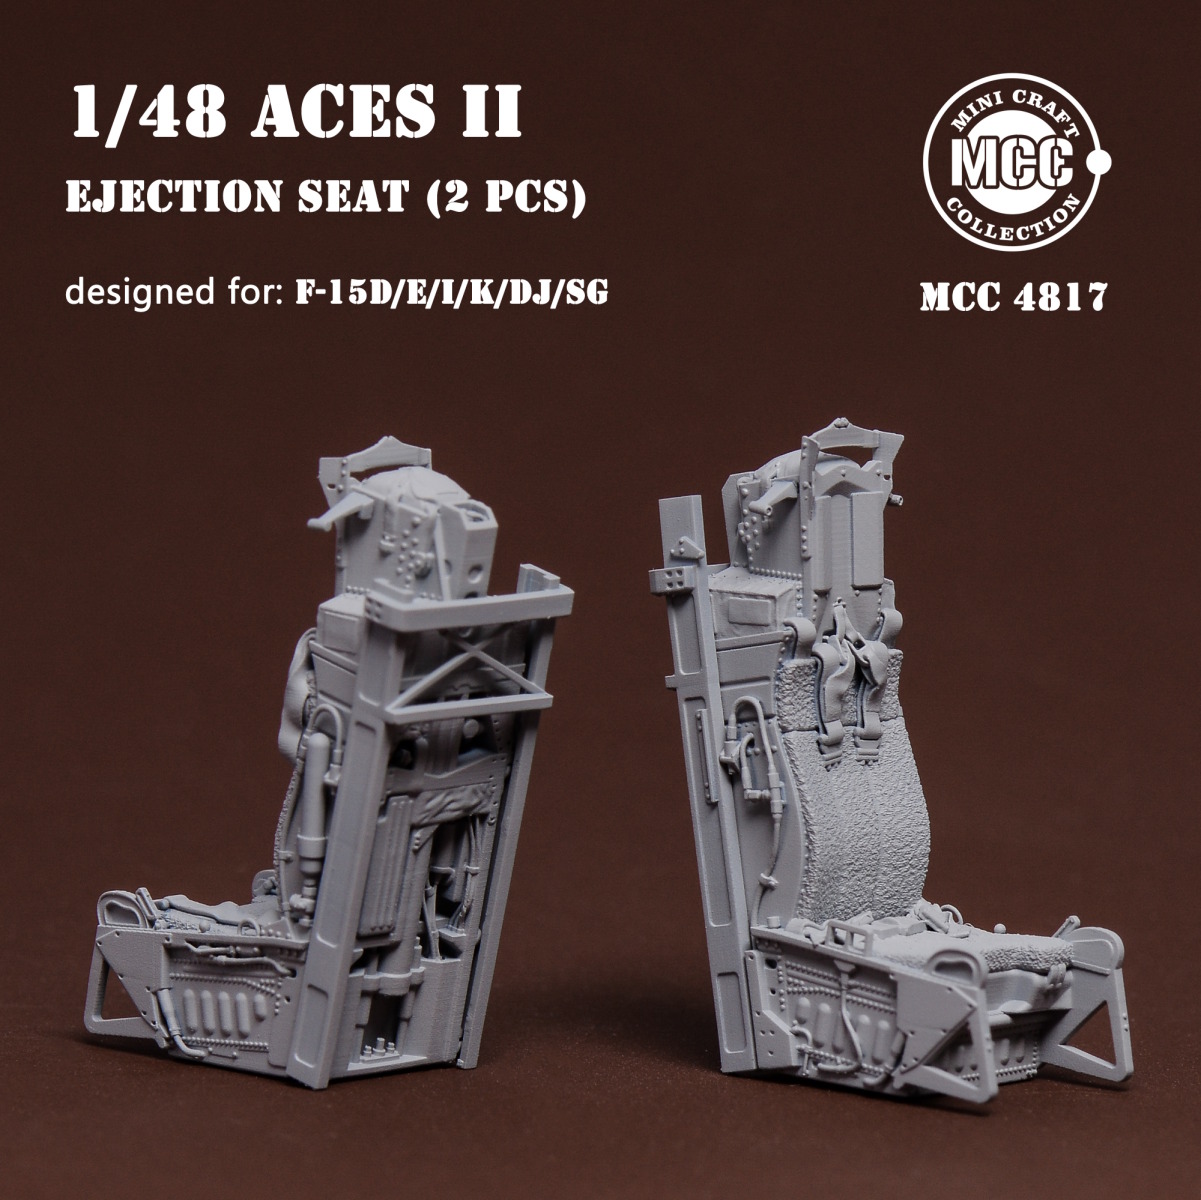 1/48 ACES II Ejection Seats for F-15E (2pcs)